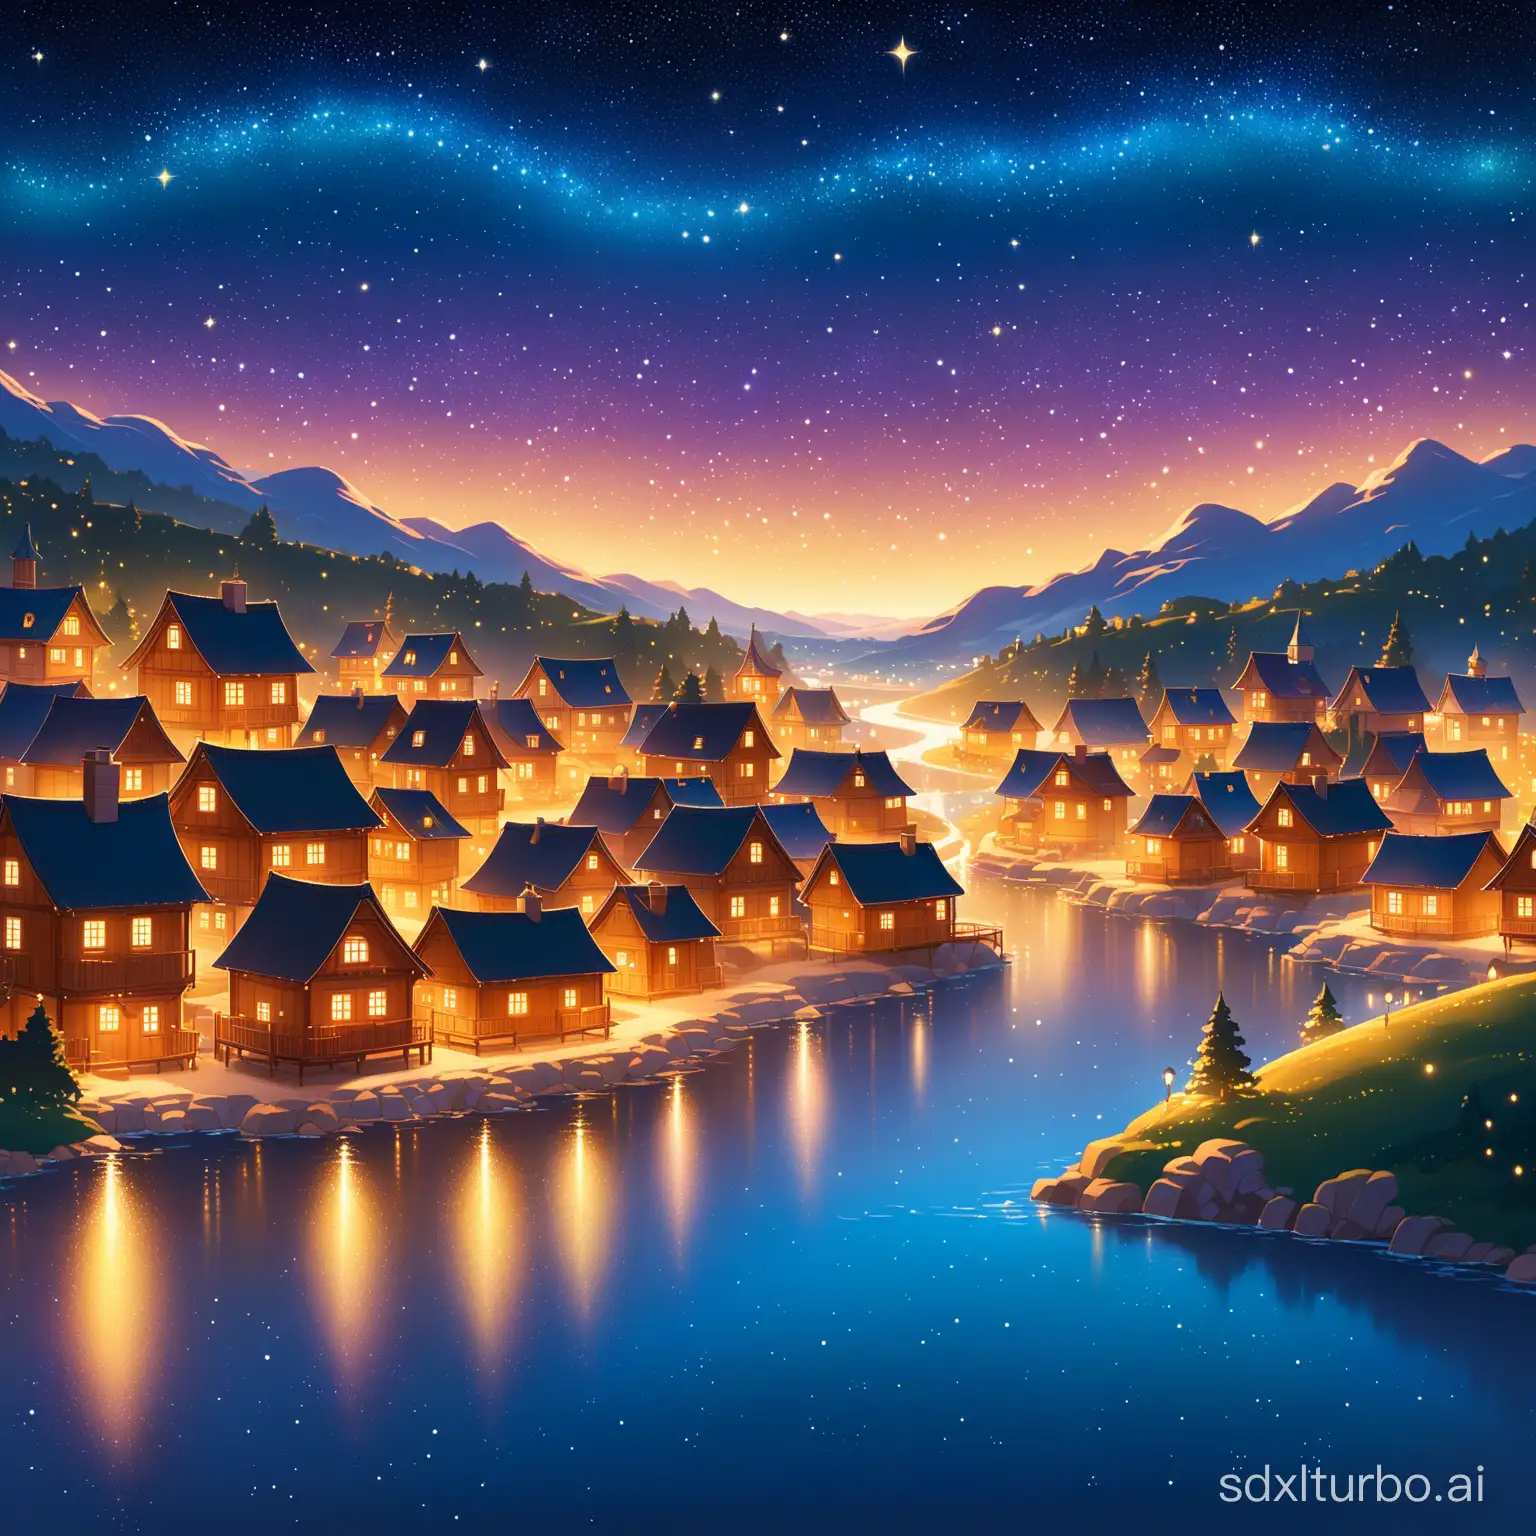 A tranquil town, with the starry night sky shimmering, warm lights spilling onto small houses, Disney style, aspect ratio 9:16.